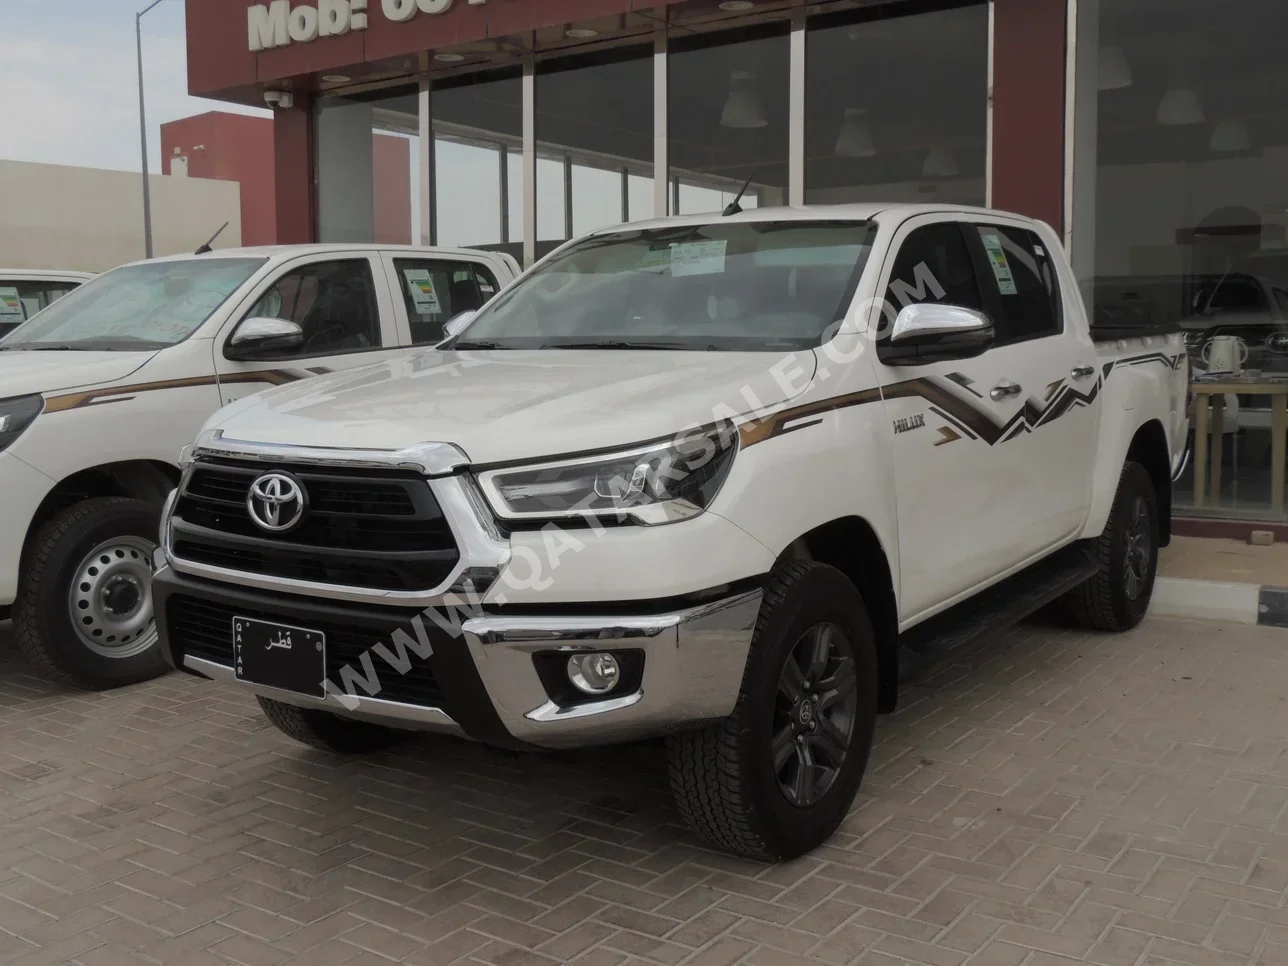 Toyota  Hilux  SR5  2024  Automatic  9,000 Km  4 Cylinder  Four Wheel Drive (4WD)  Pick Up  White  With Warranty